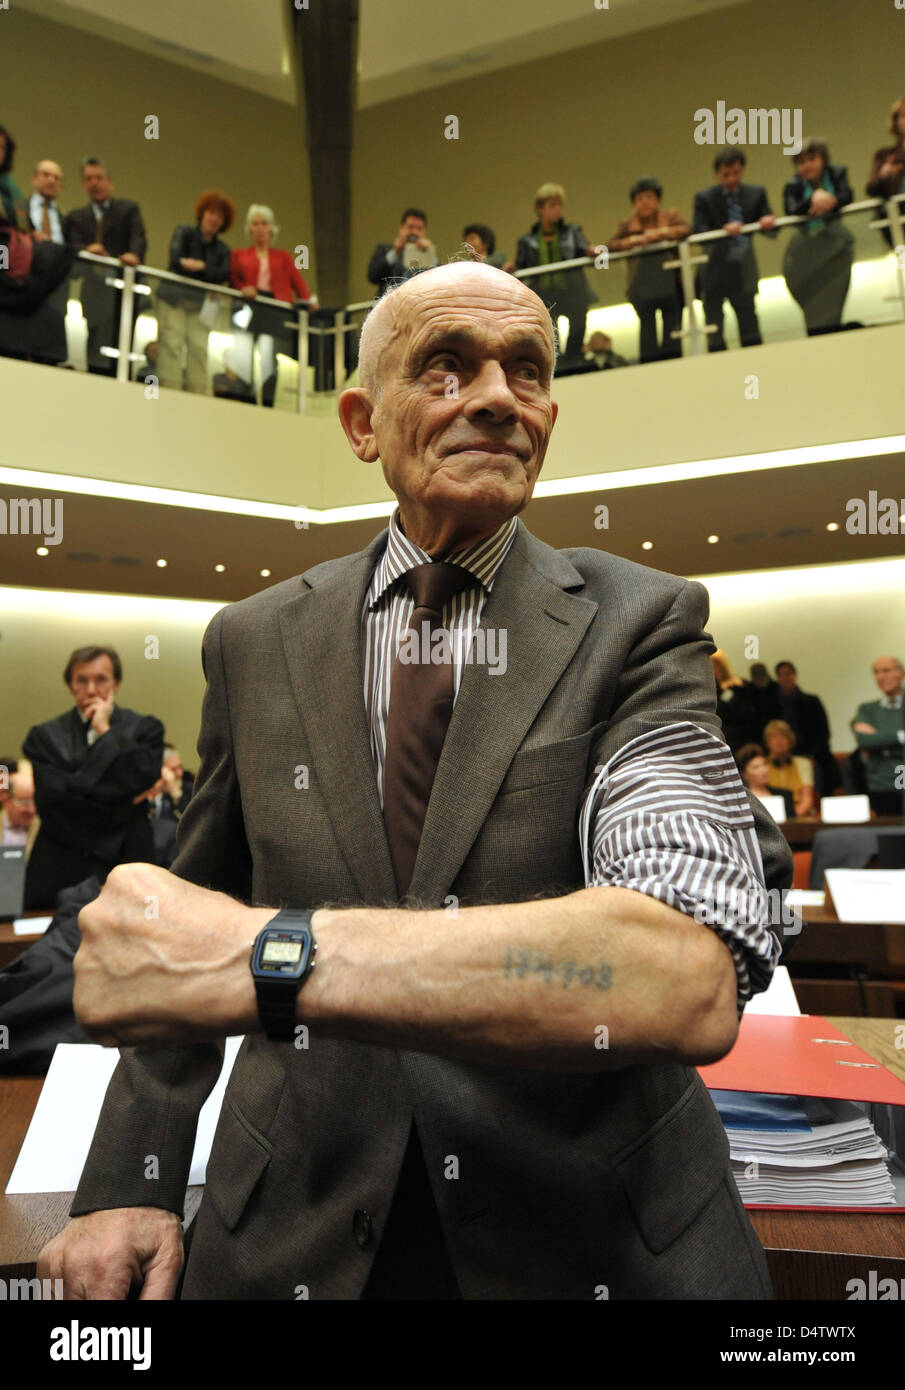 Survivor of the Auschwitz-Birkenau concentration camp and joint plaintiff Robert Cohen shows his concentration camp identification tattoo prior to the trial against alleged Nazi war criminal John Demjanjuk at the District Court in Munich, Germany, 30 November 2009. Cohen lost relatives at Sobibor concentration camp. One of the last nazi trials opens on 30 November 2009. 89-year-old Stock Photo